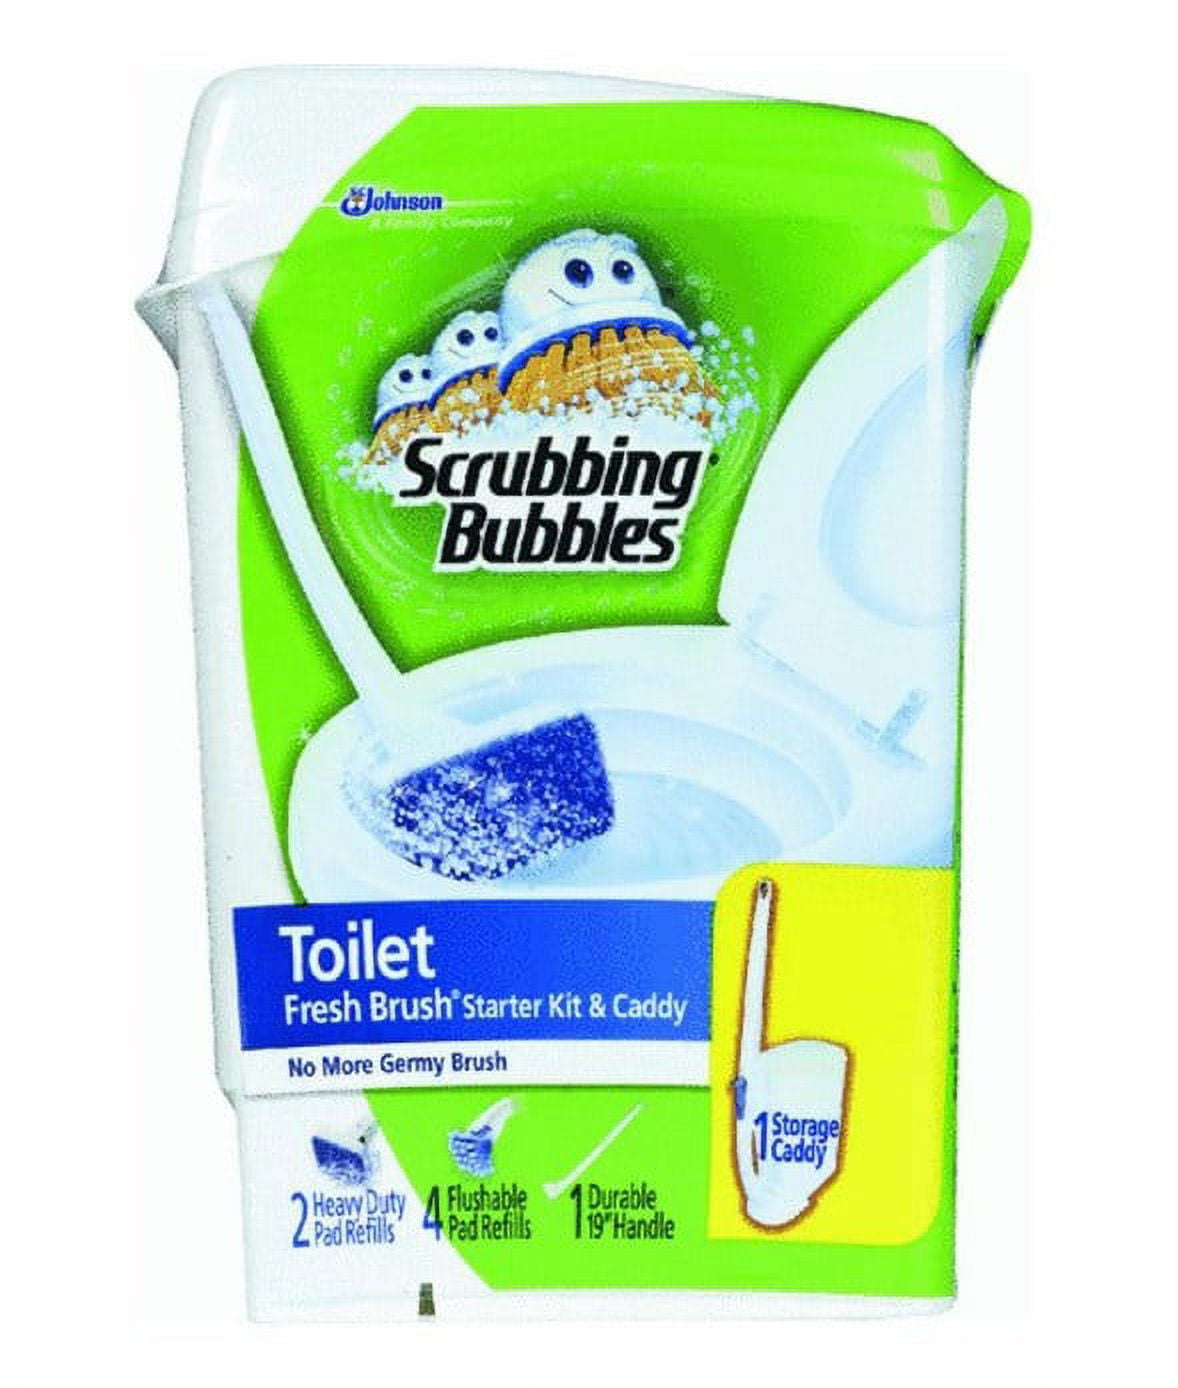 Scrubbing Bubbles Fresh Brush Starter Kit, Citrus - Toilet Cleaning System  with Flushable Pads (19 Inch Handle, 8 Pads and 1 Stand)